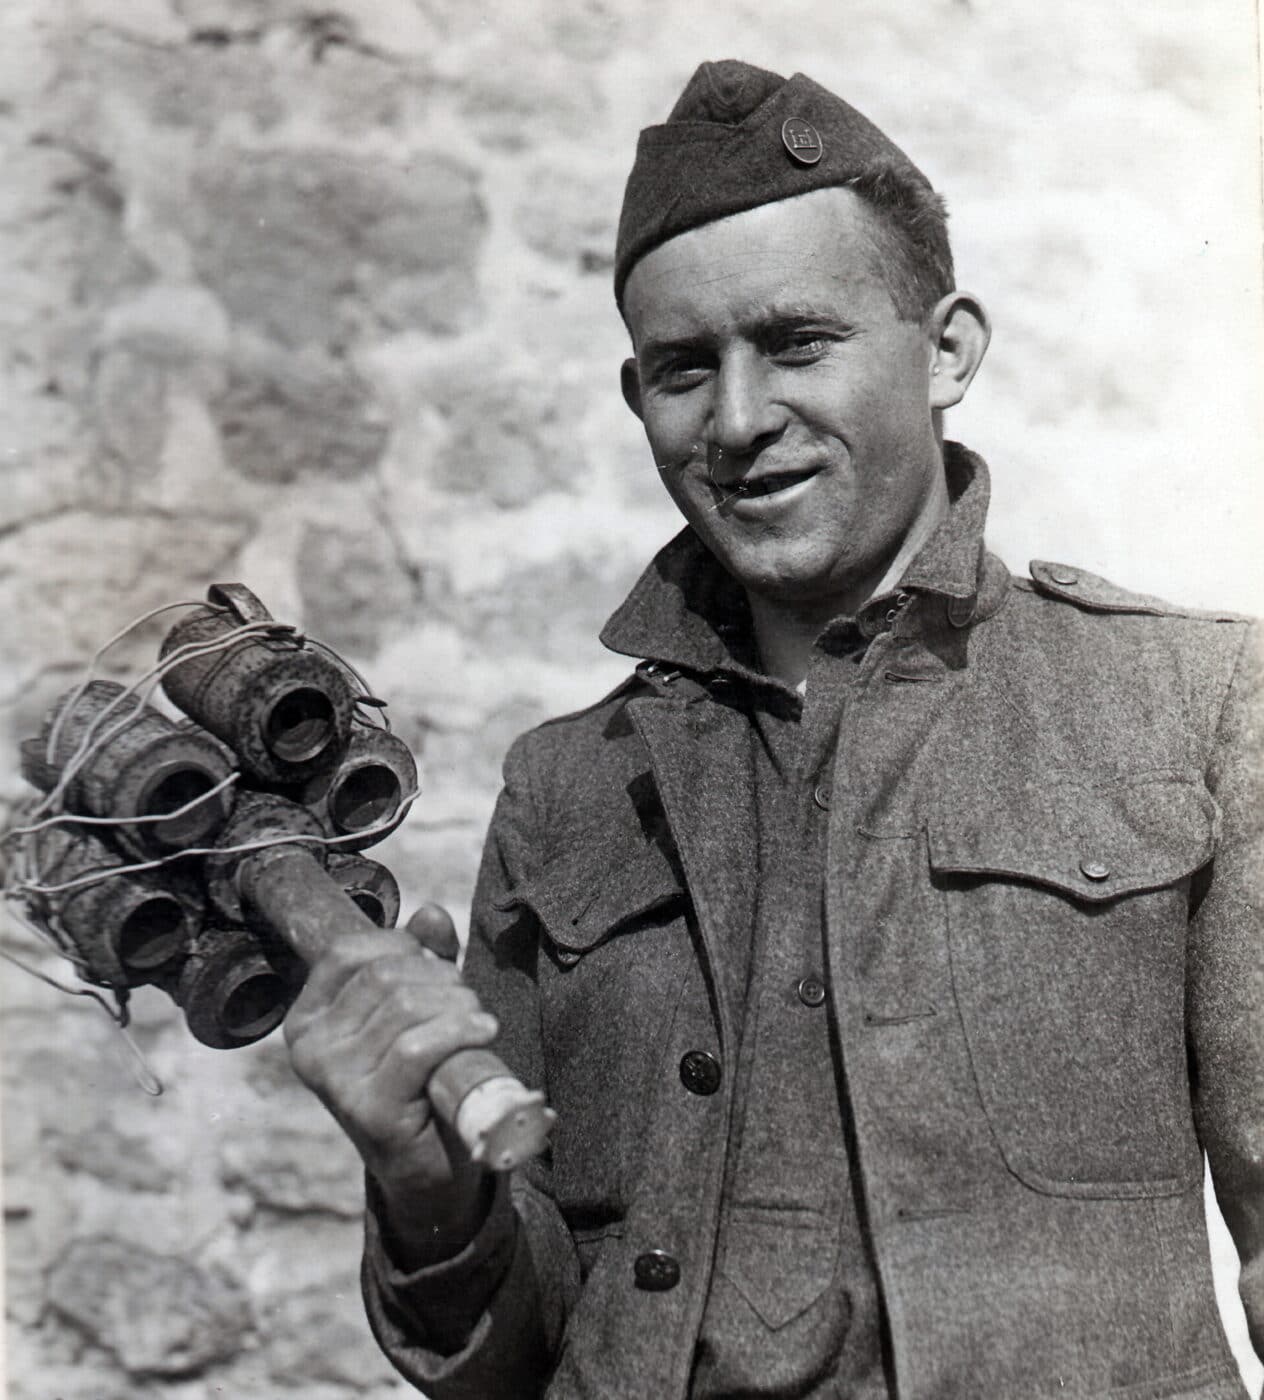 A U.S. Doughboy poses with a captured German “bundled charge” made from seven standard stick grenades